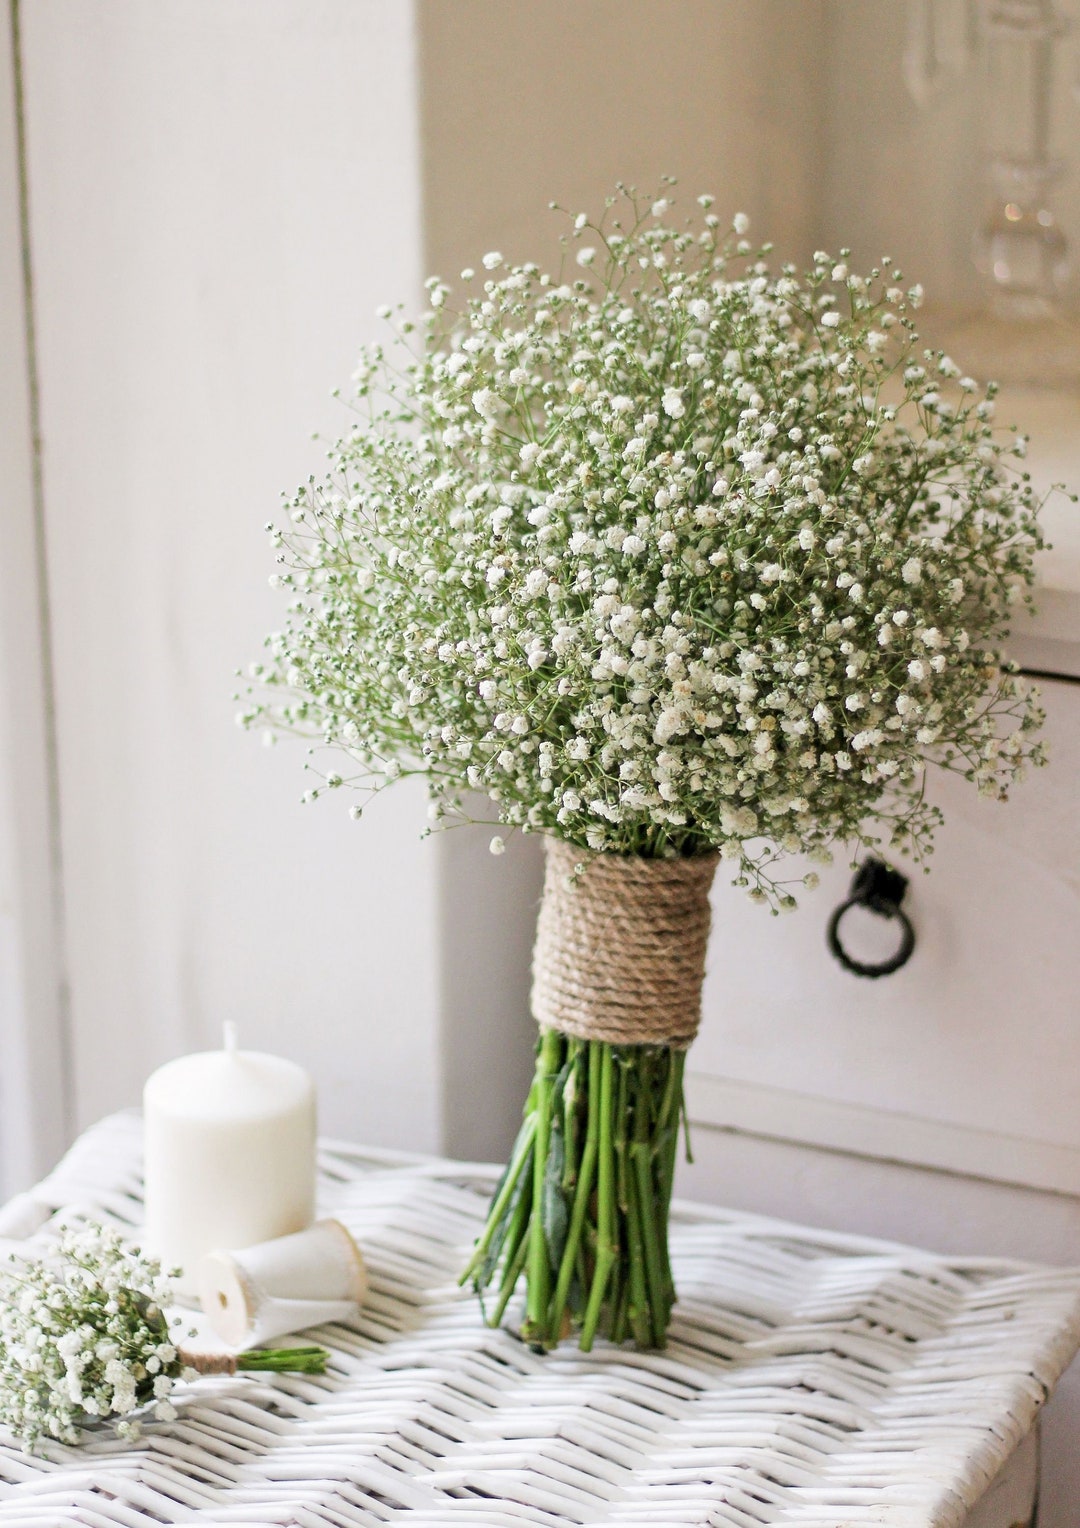 Hawesome 10pc Babys Breath Artificial Flowers Gypsophila Real Touch Flowers  Fake Bouquet Home Wedding Garden DIY Decor(White)